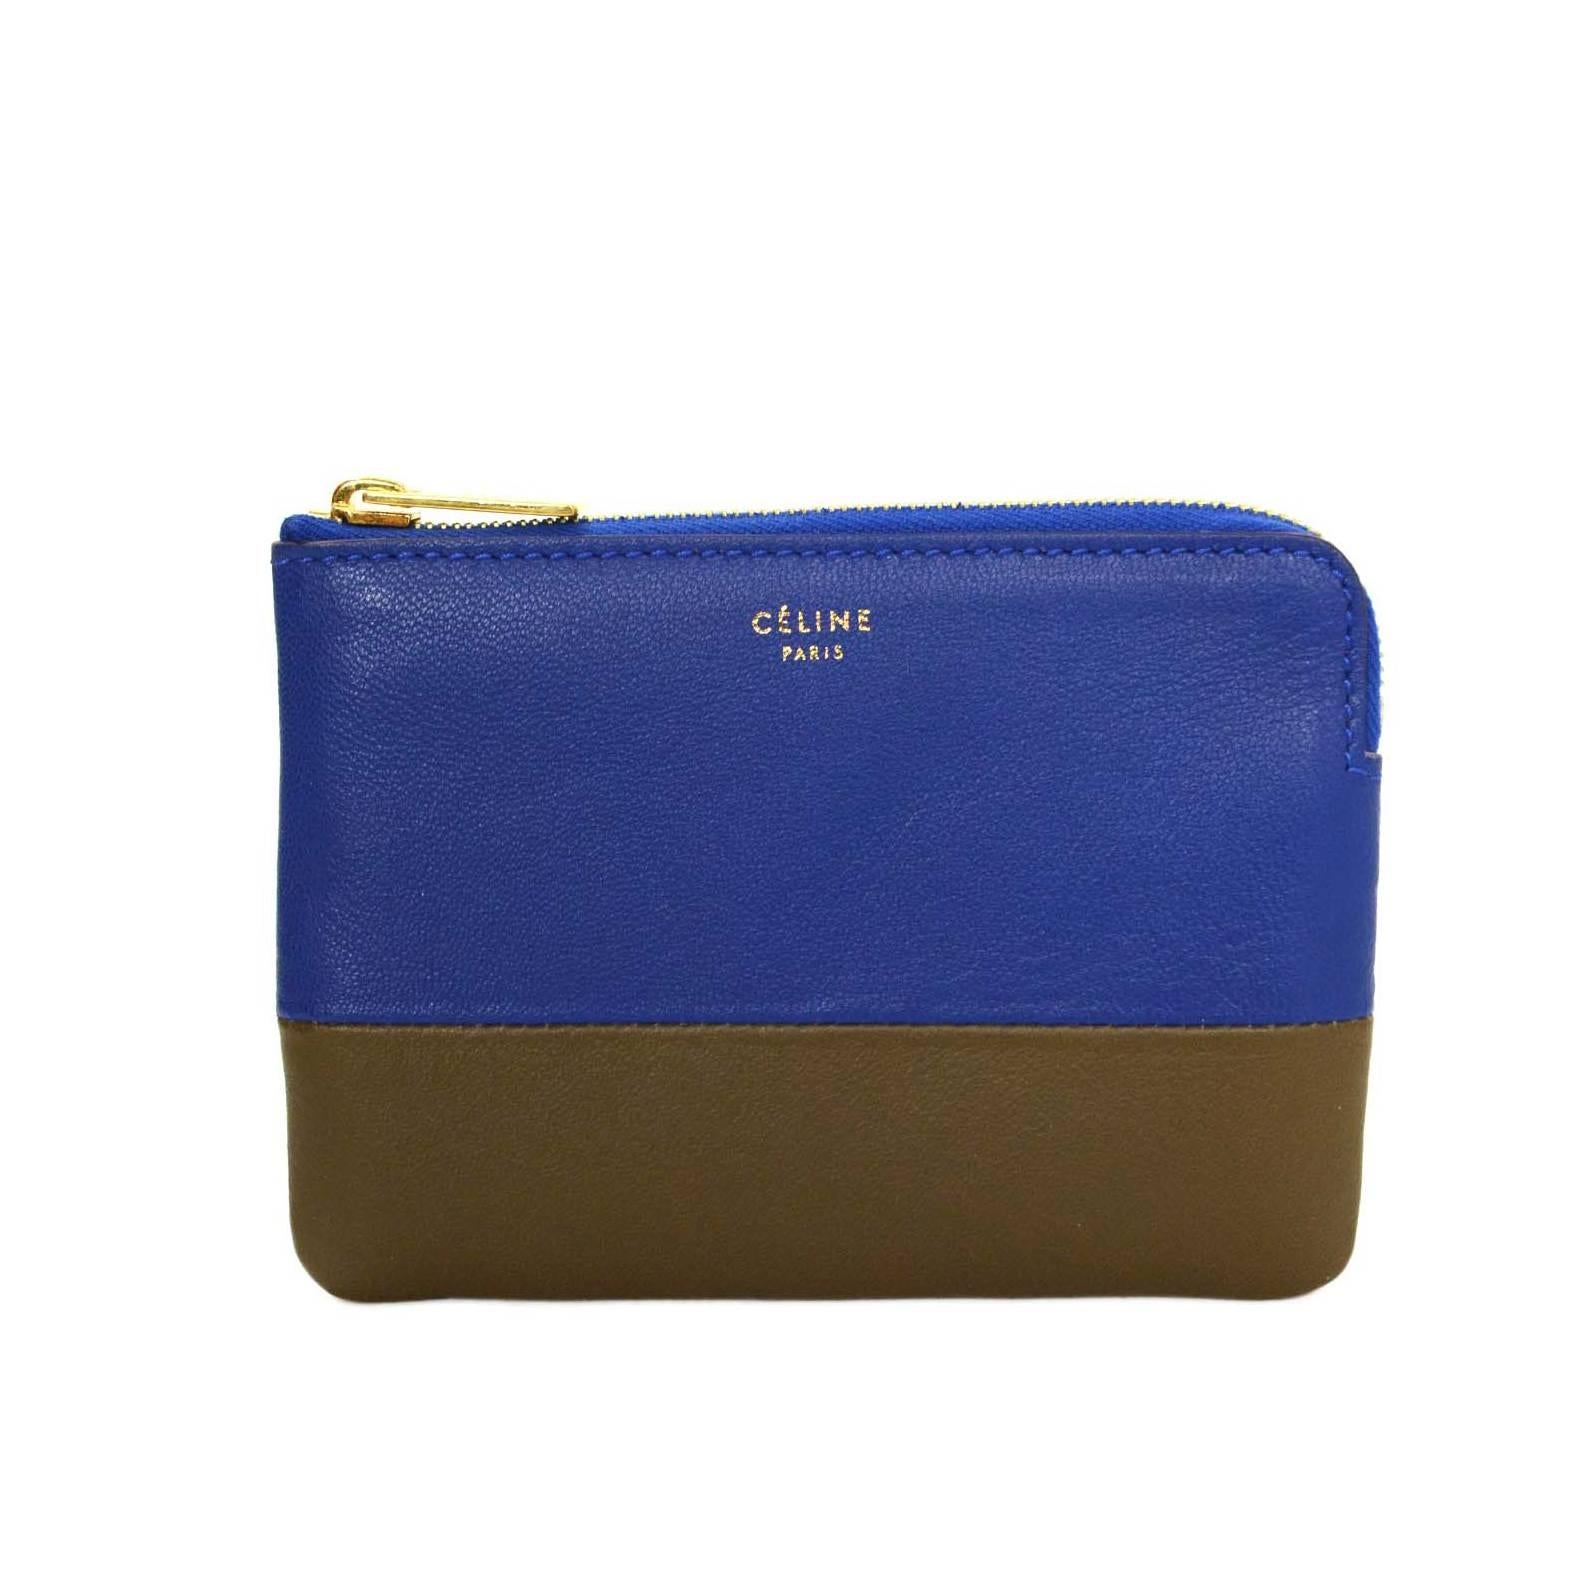 Celine Blue & Taupe Leather Coin Purse GHW